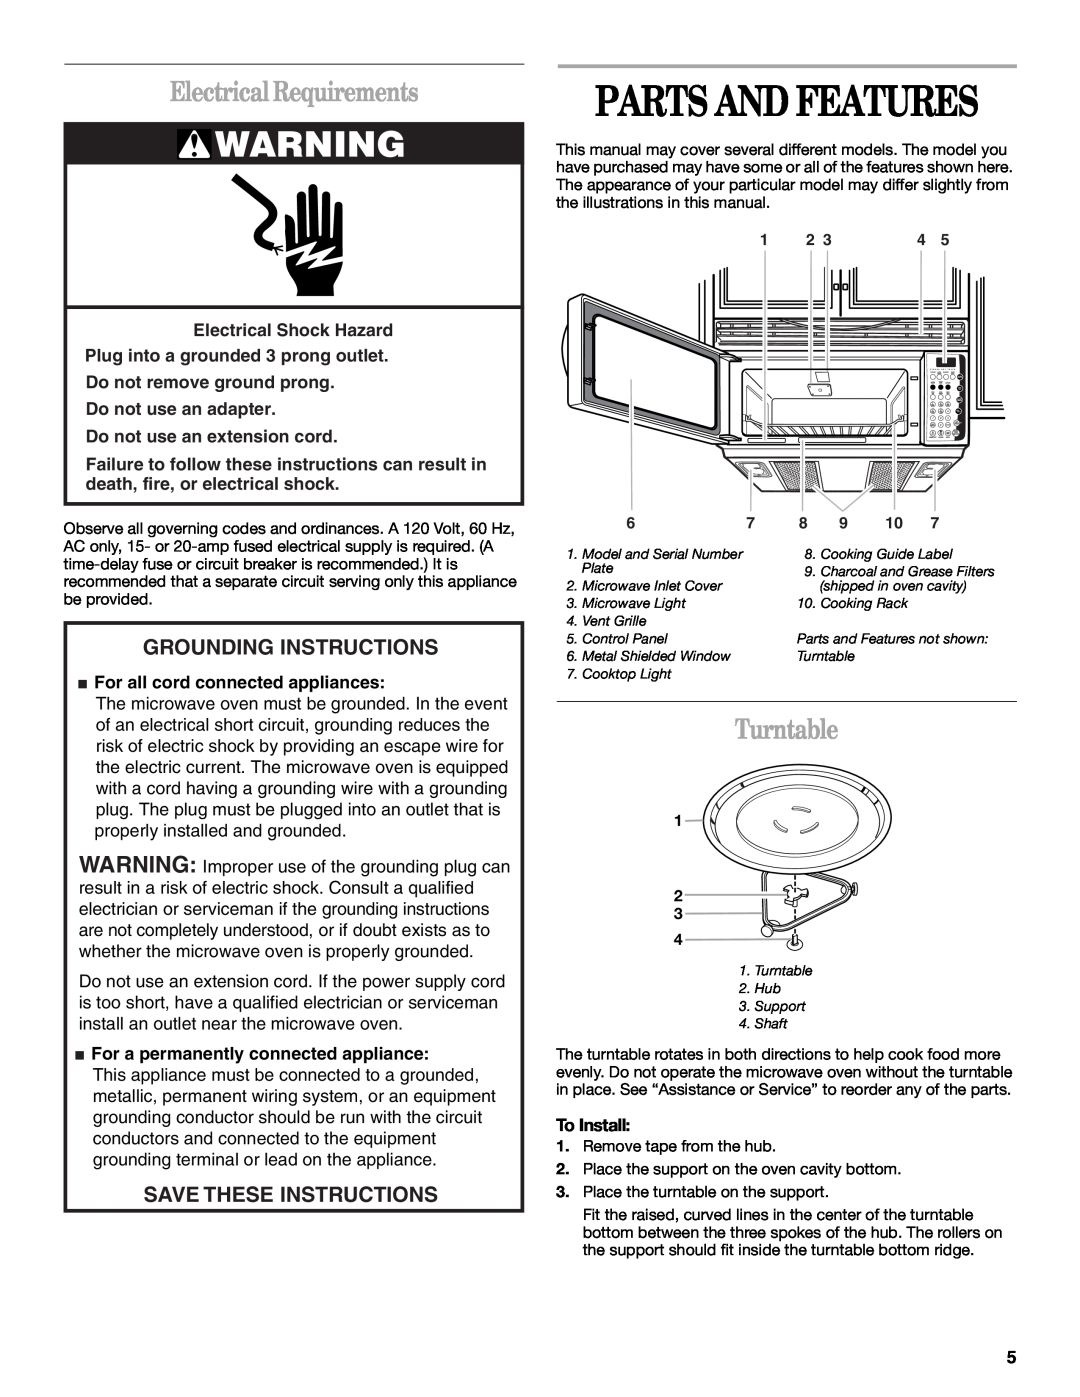 Whirlpool GH9184XL Parts And Features, Electrical Requirements, Turntable, Grounding Instructions, Save These Instructions 